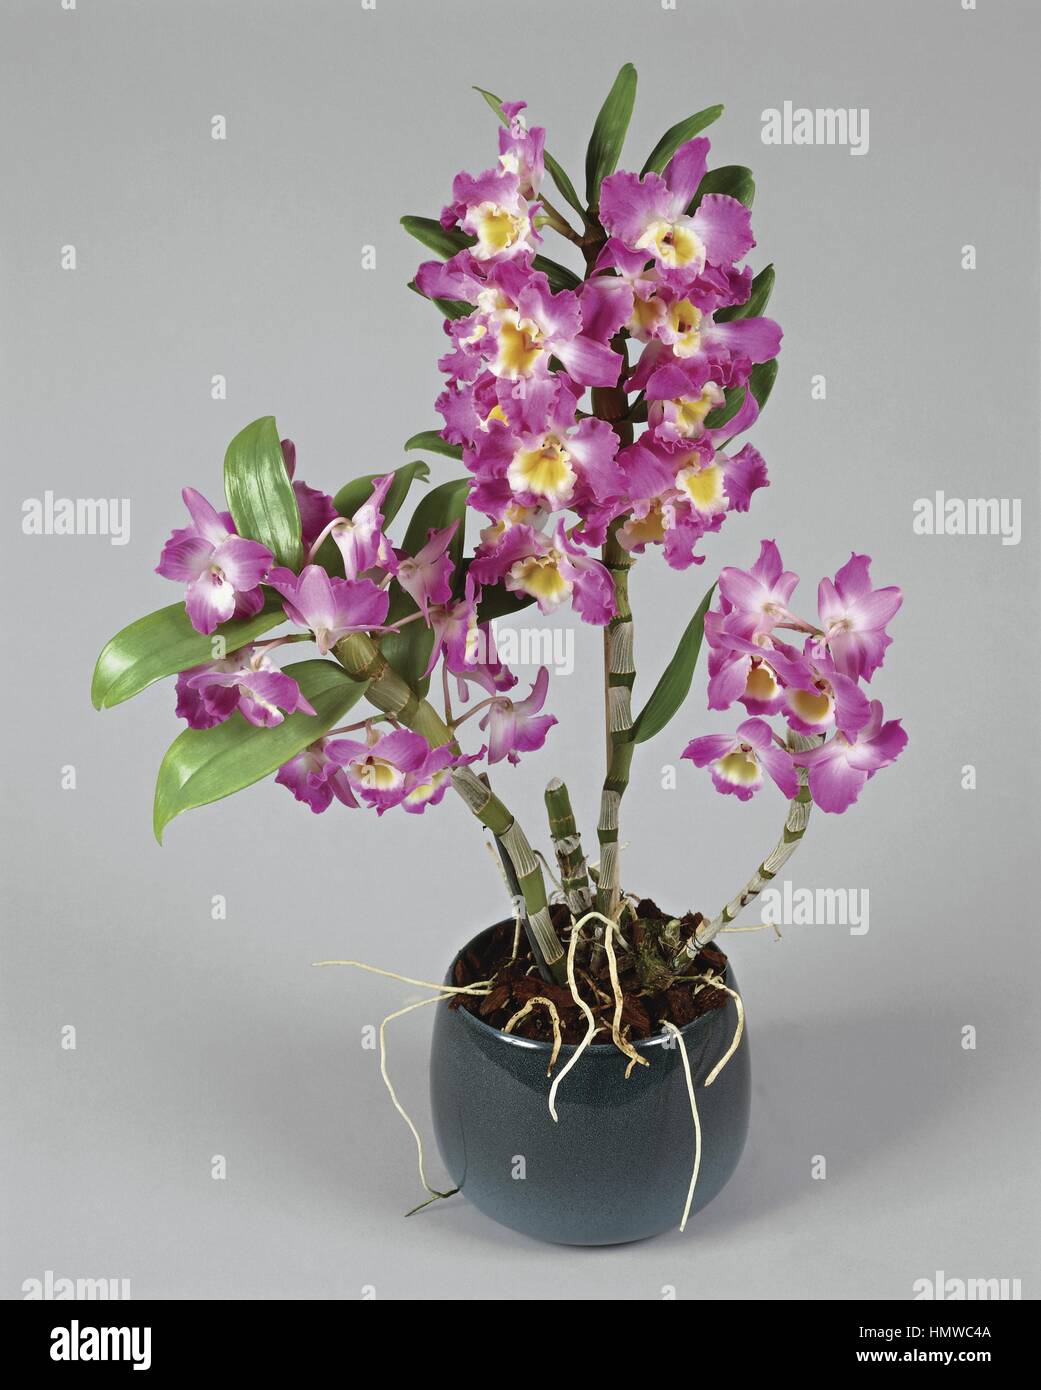 Houseplants - Orchidaceae. Dendrobium loddigesii (Rose-purple flowers with a yellow disk) Stock Photo